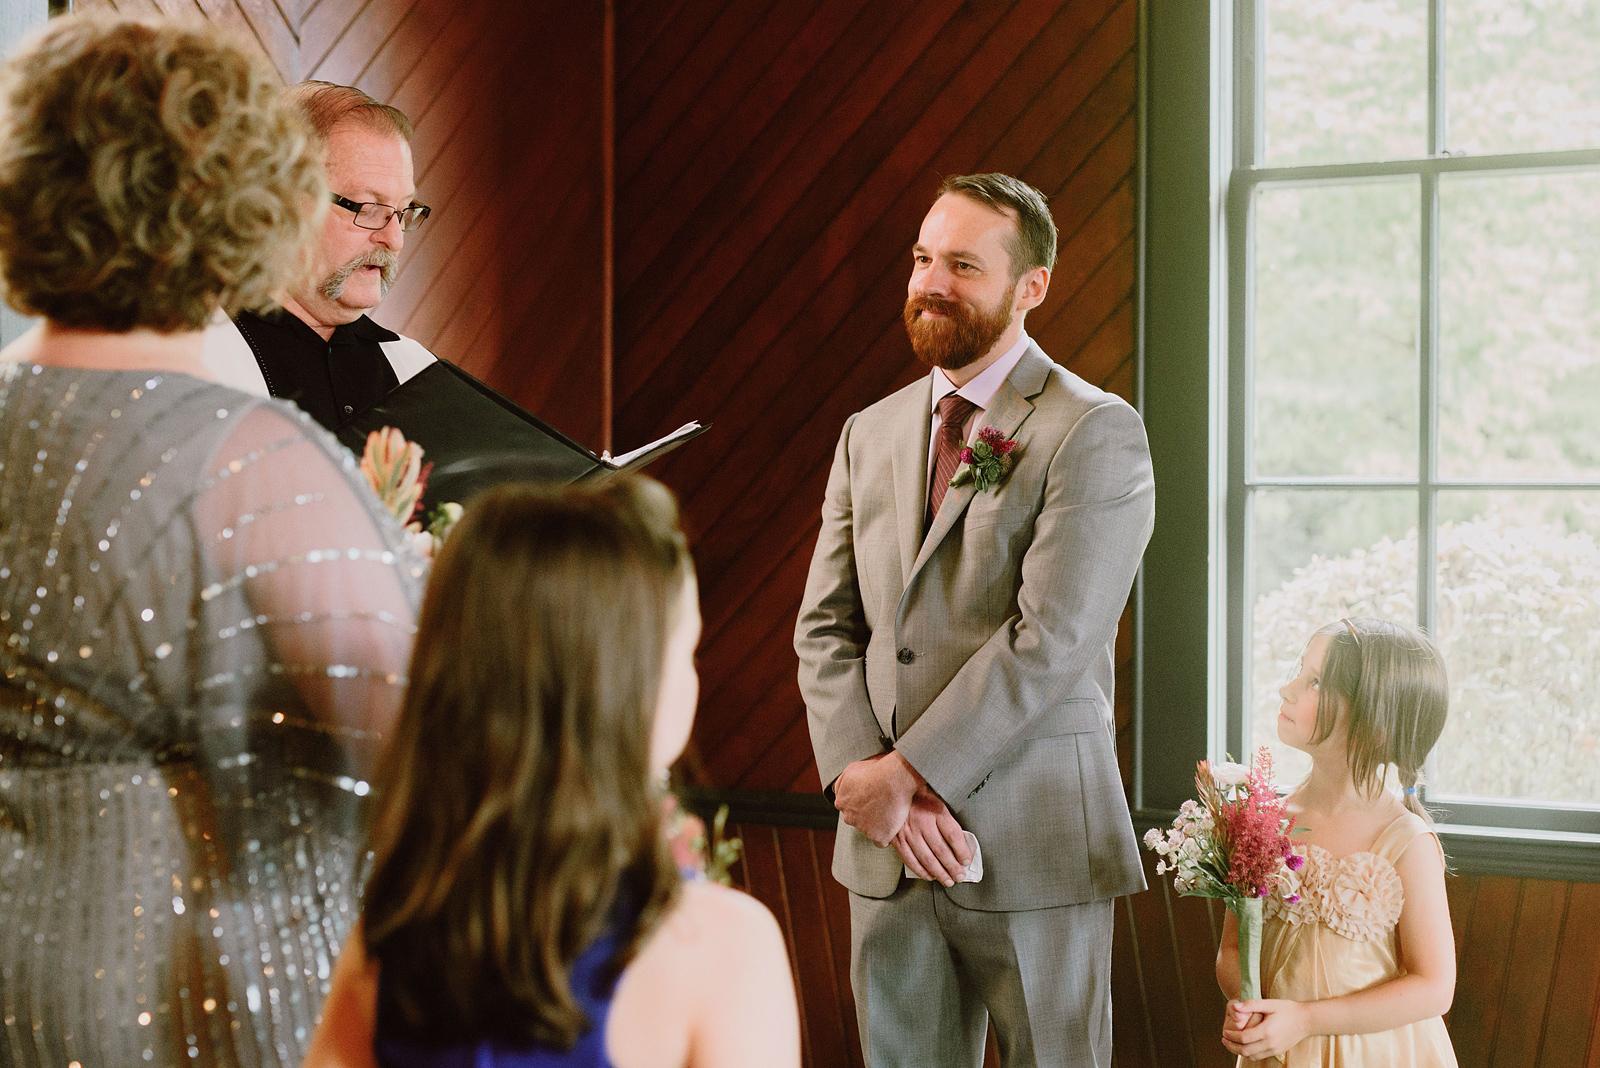 Groom smiling at his bride during the ceremony - Oaks Pioneer Church Wedding